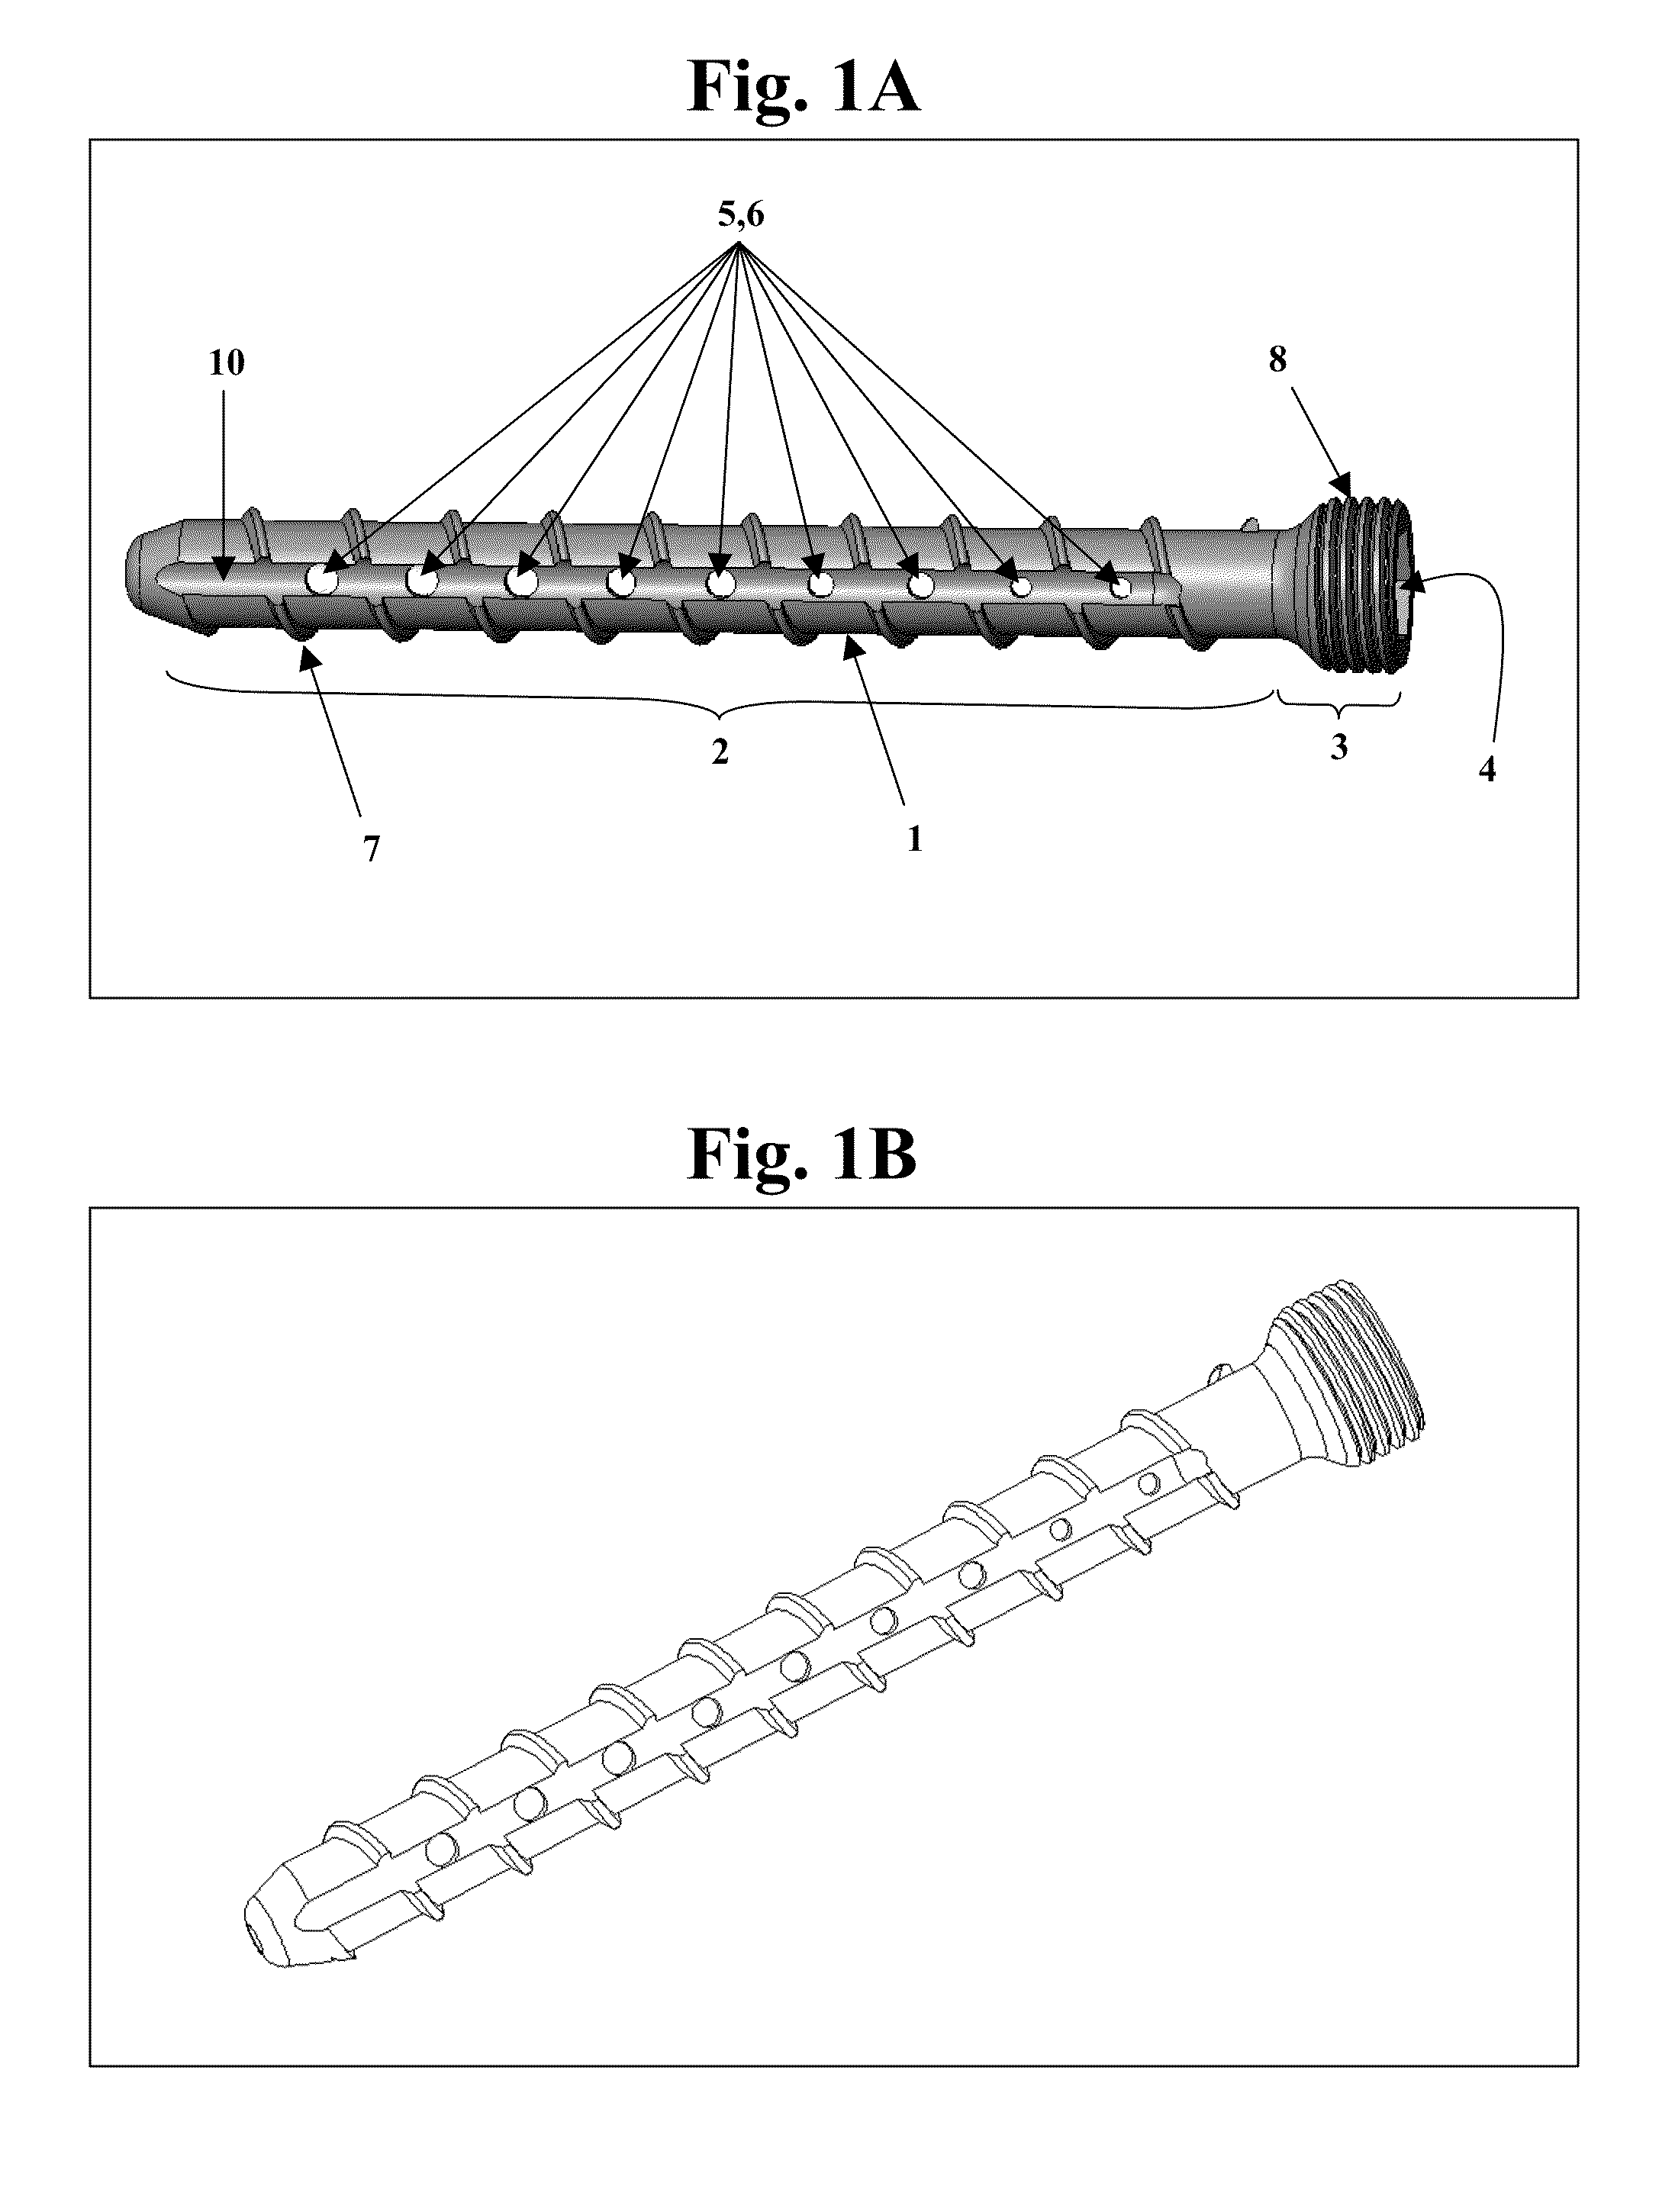 Bone screws and methods of use thereof